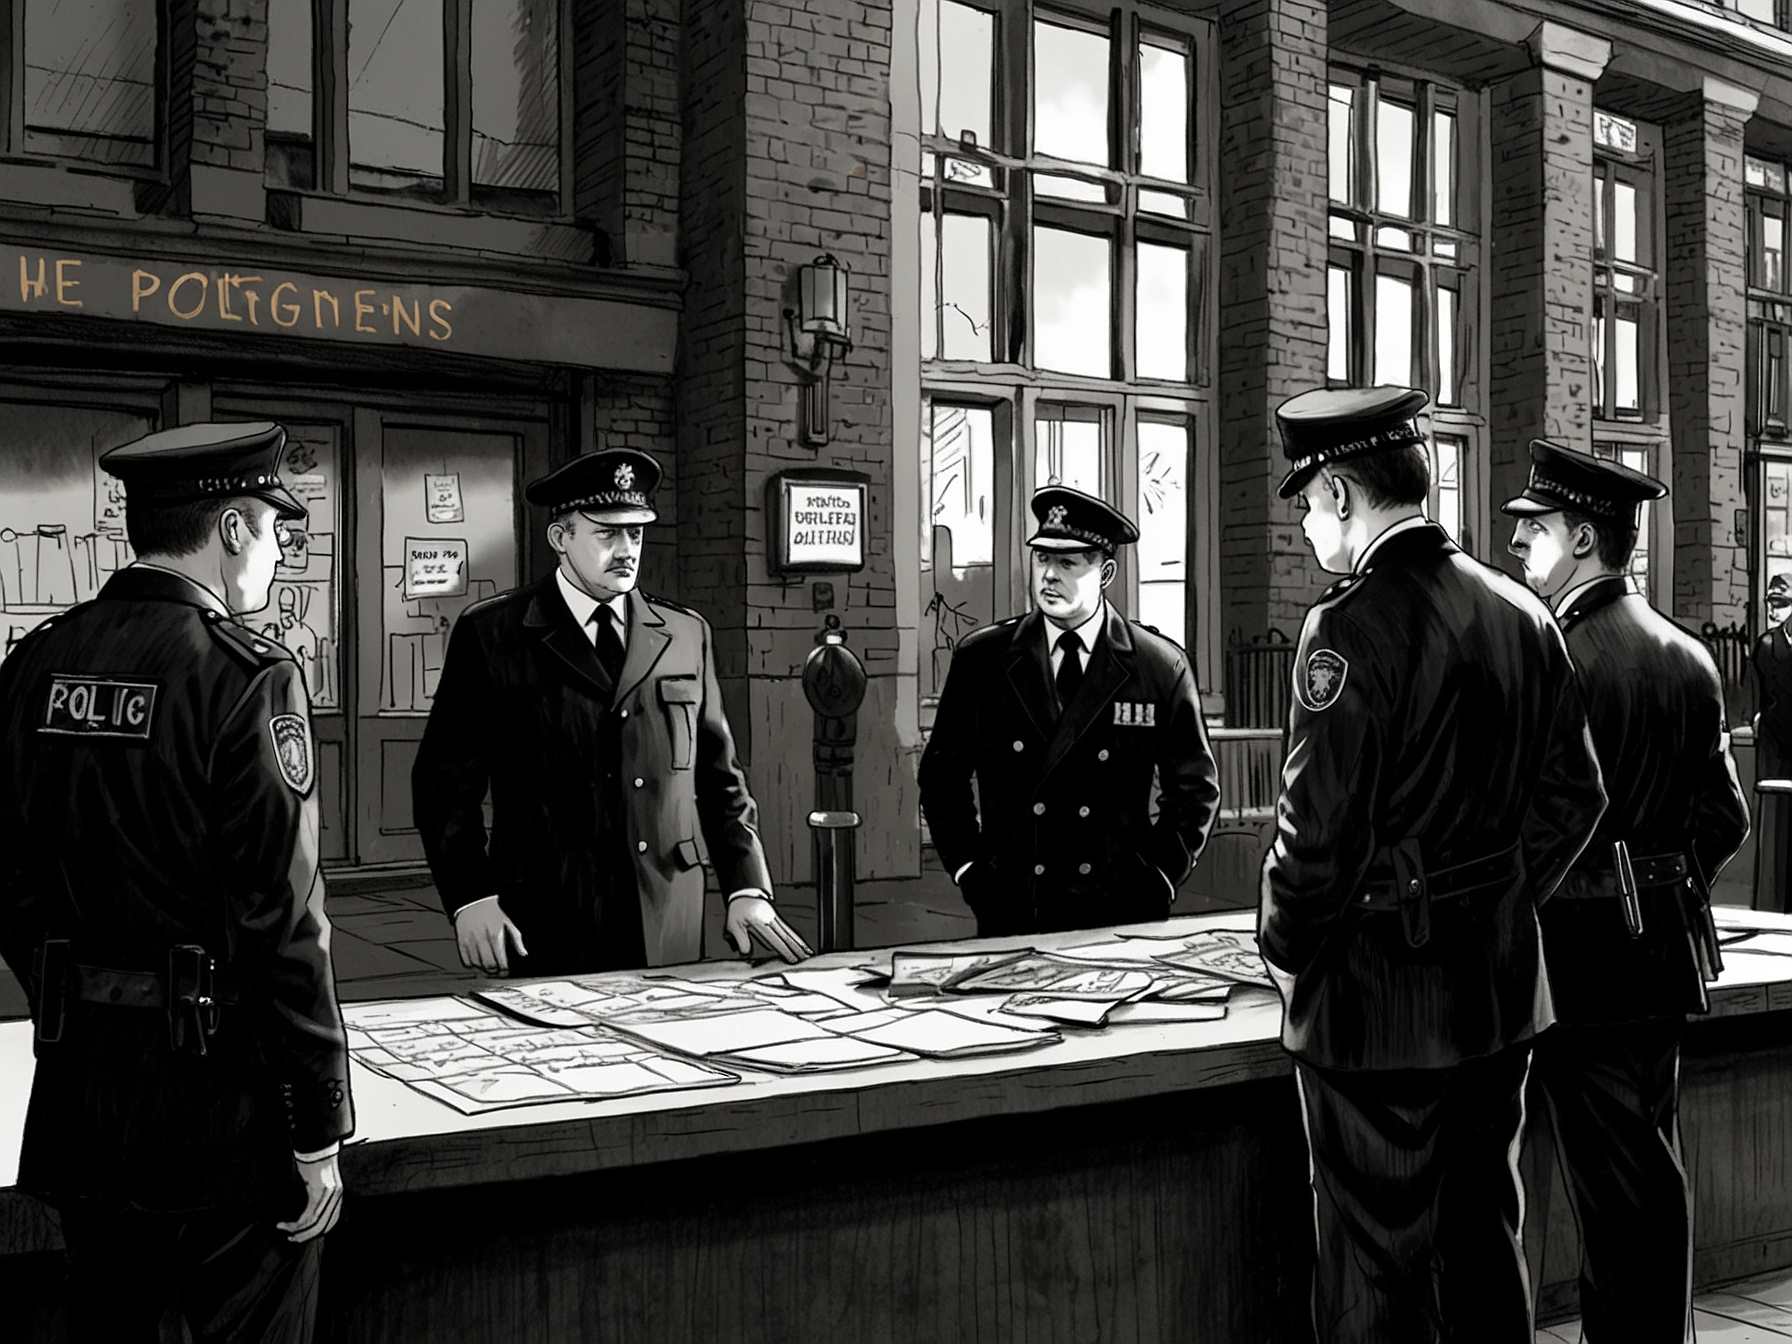 Metropolitan Police officers outside their headquarters, initiating an investigation into alleged election date leaks and related bets, underscoring the seriousness of the situation.